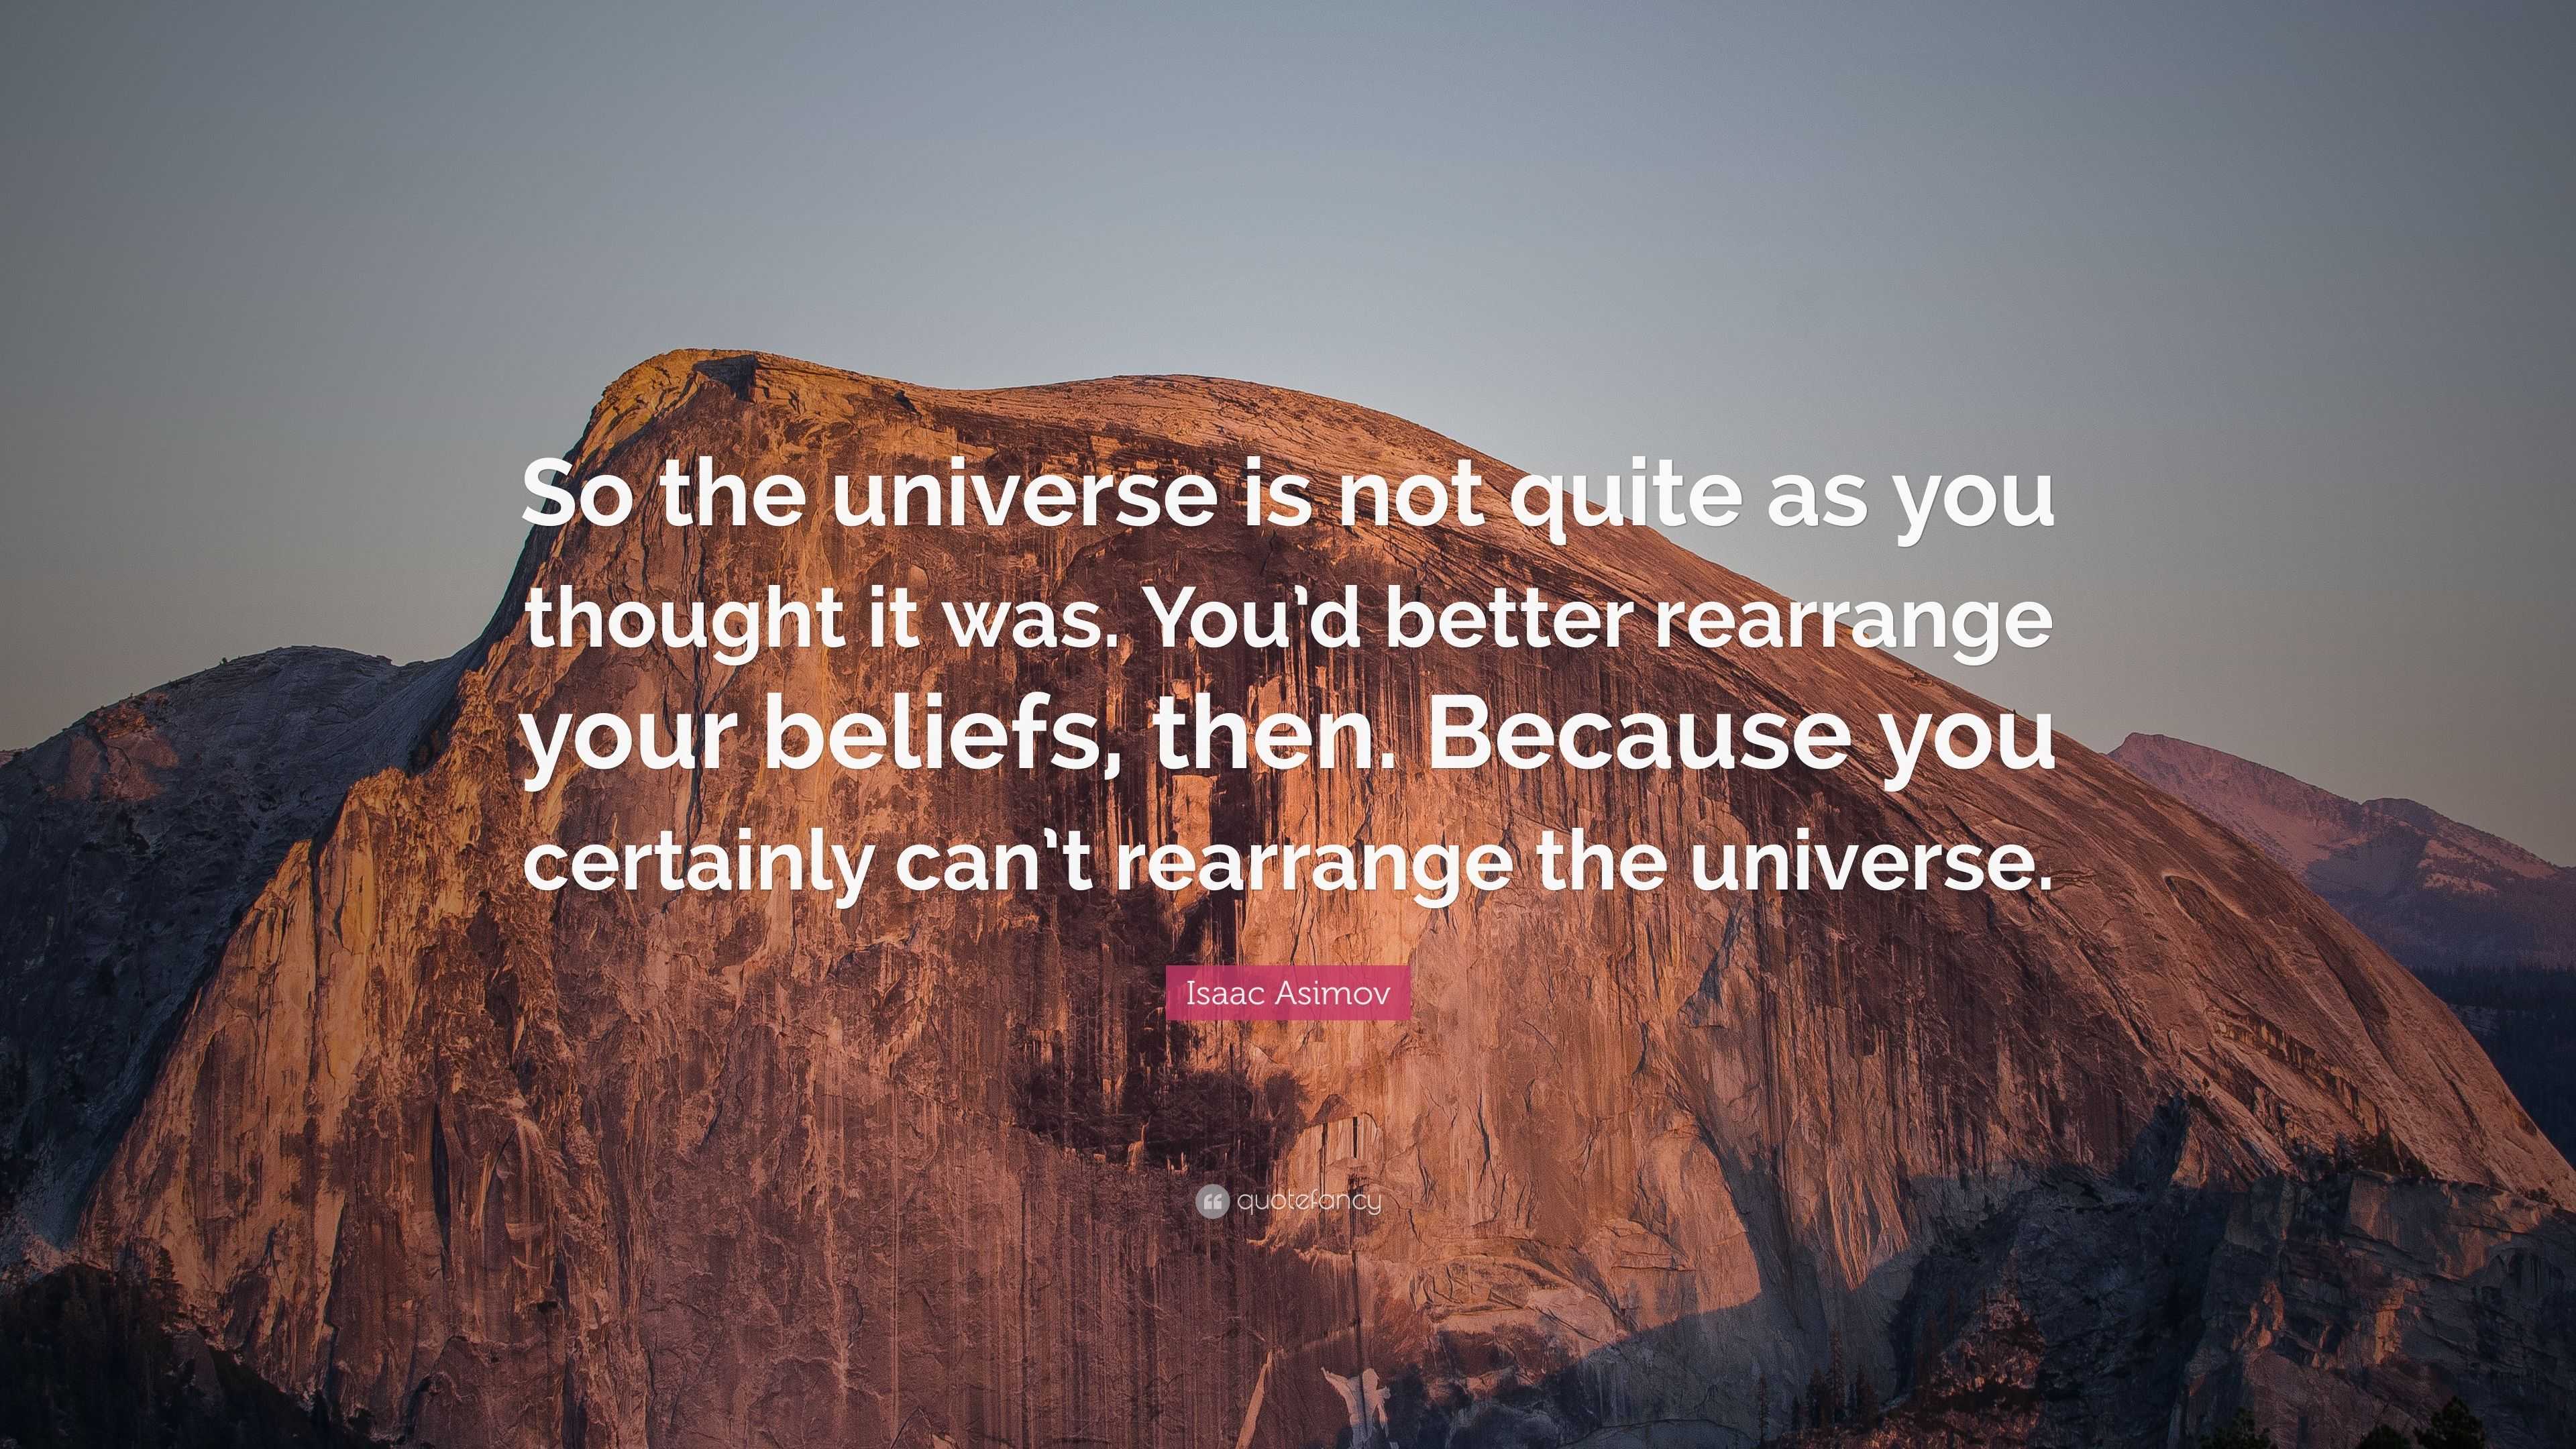 Isaac Asimov Quote: “So the universe is not quite as you thought it was ...